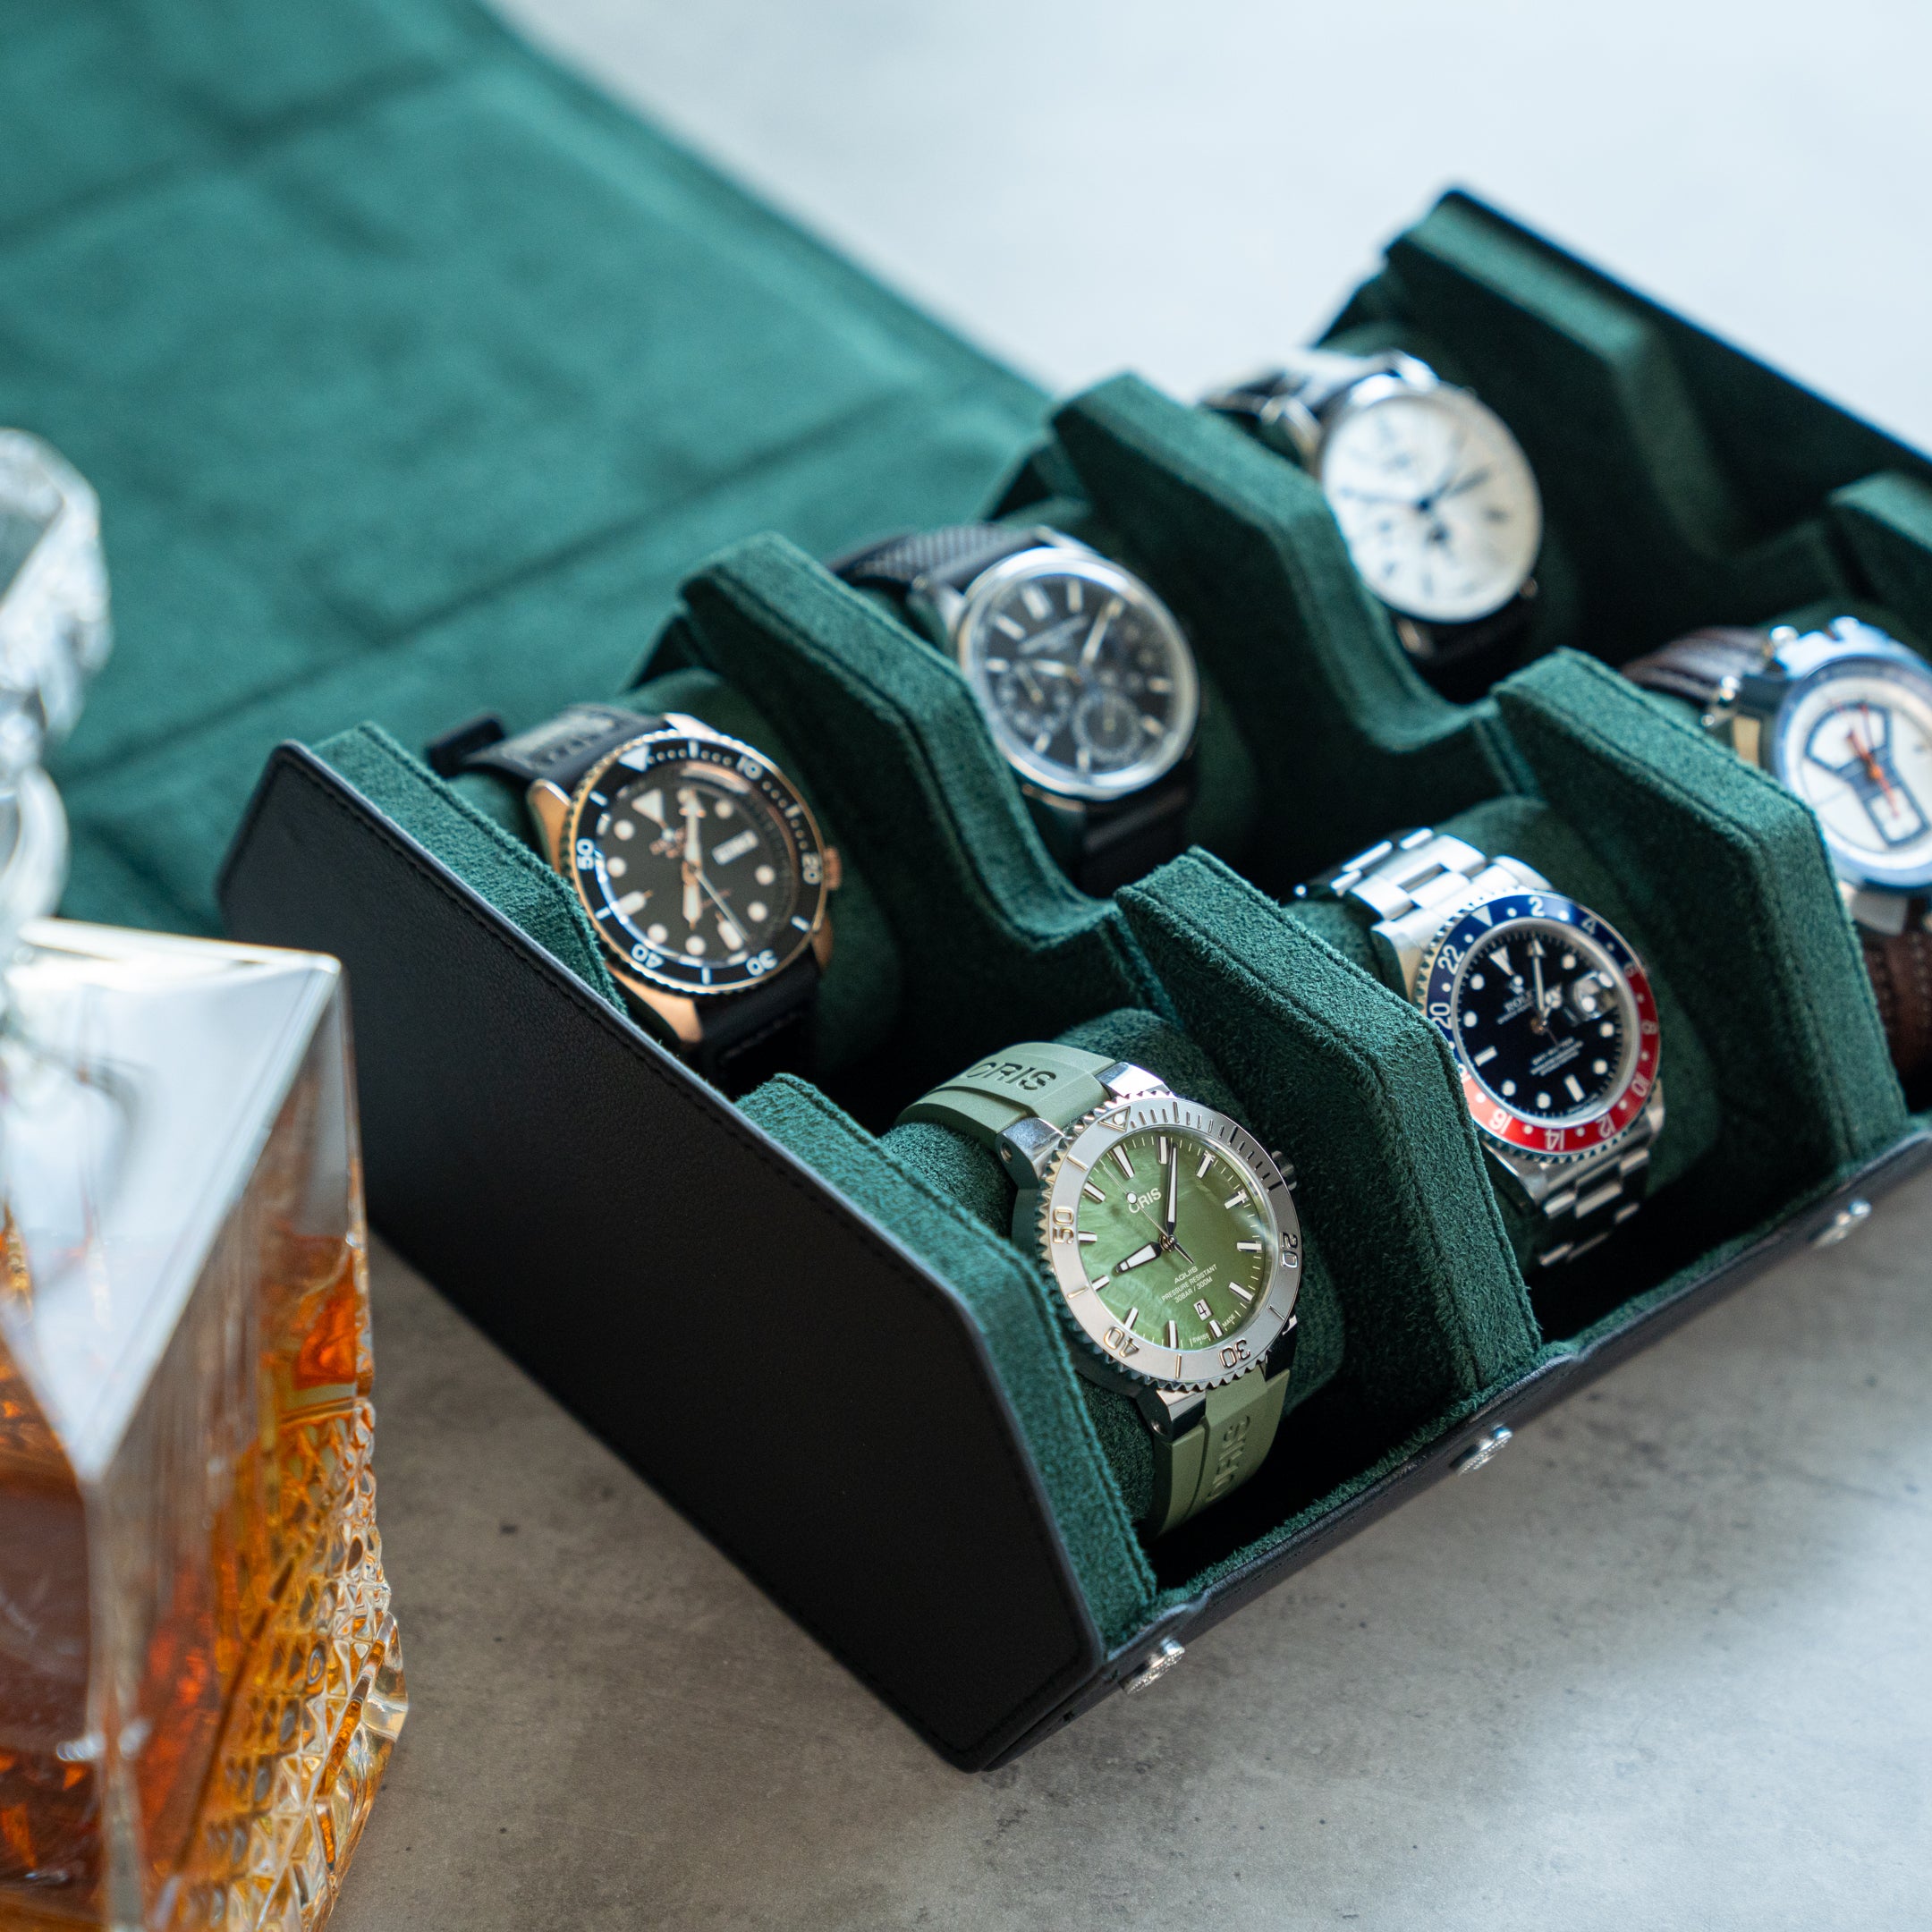 Watch Accessories | Enhance Your Watch Game at Windup Watch Shop